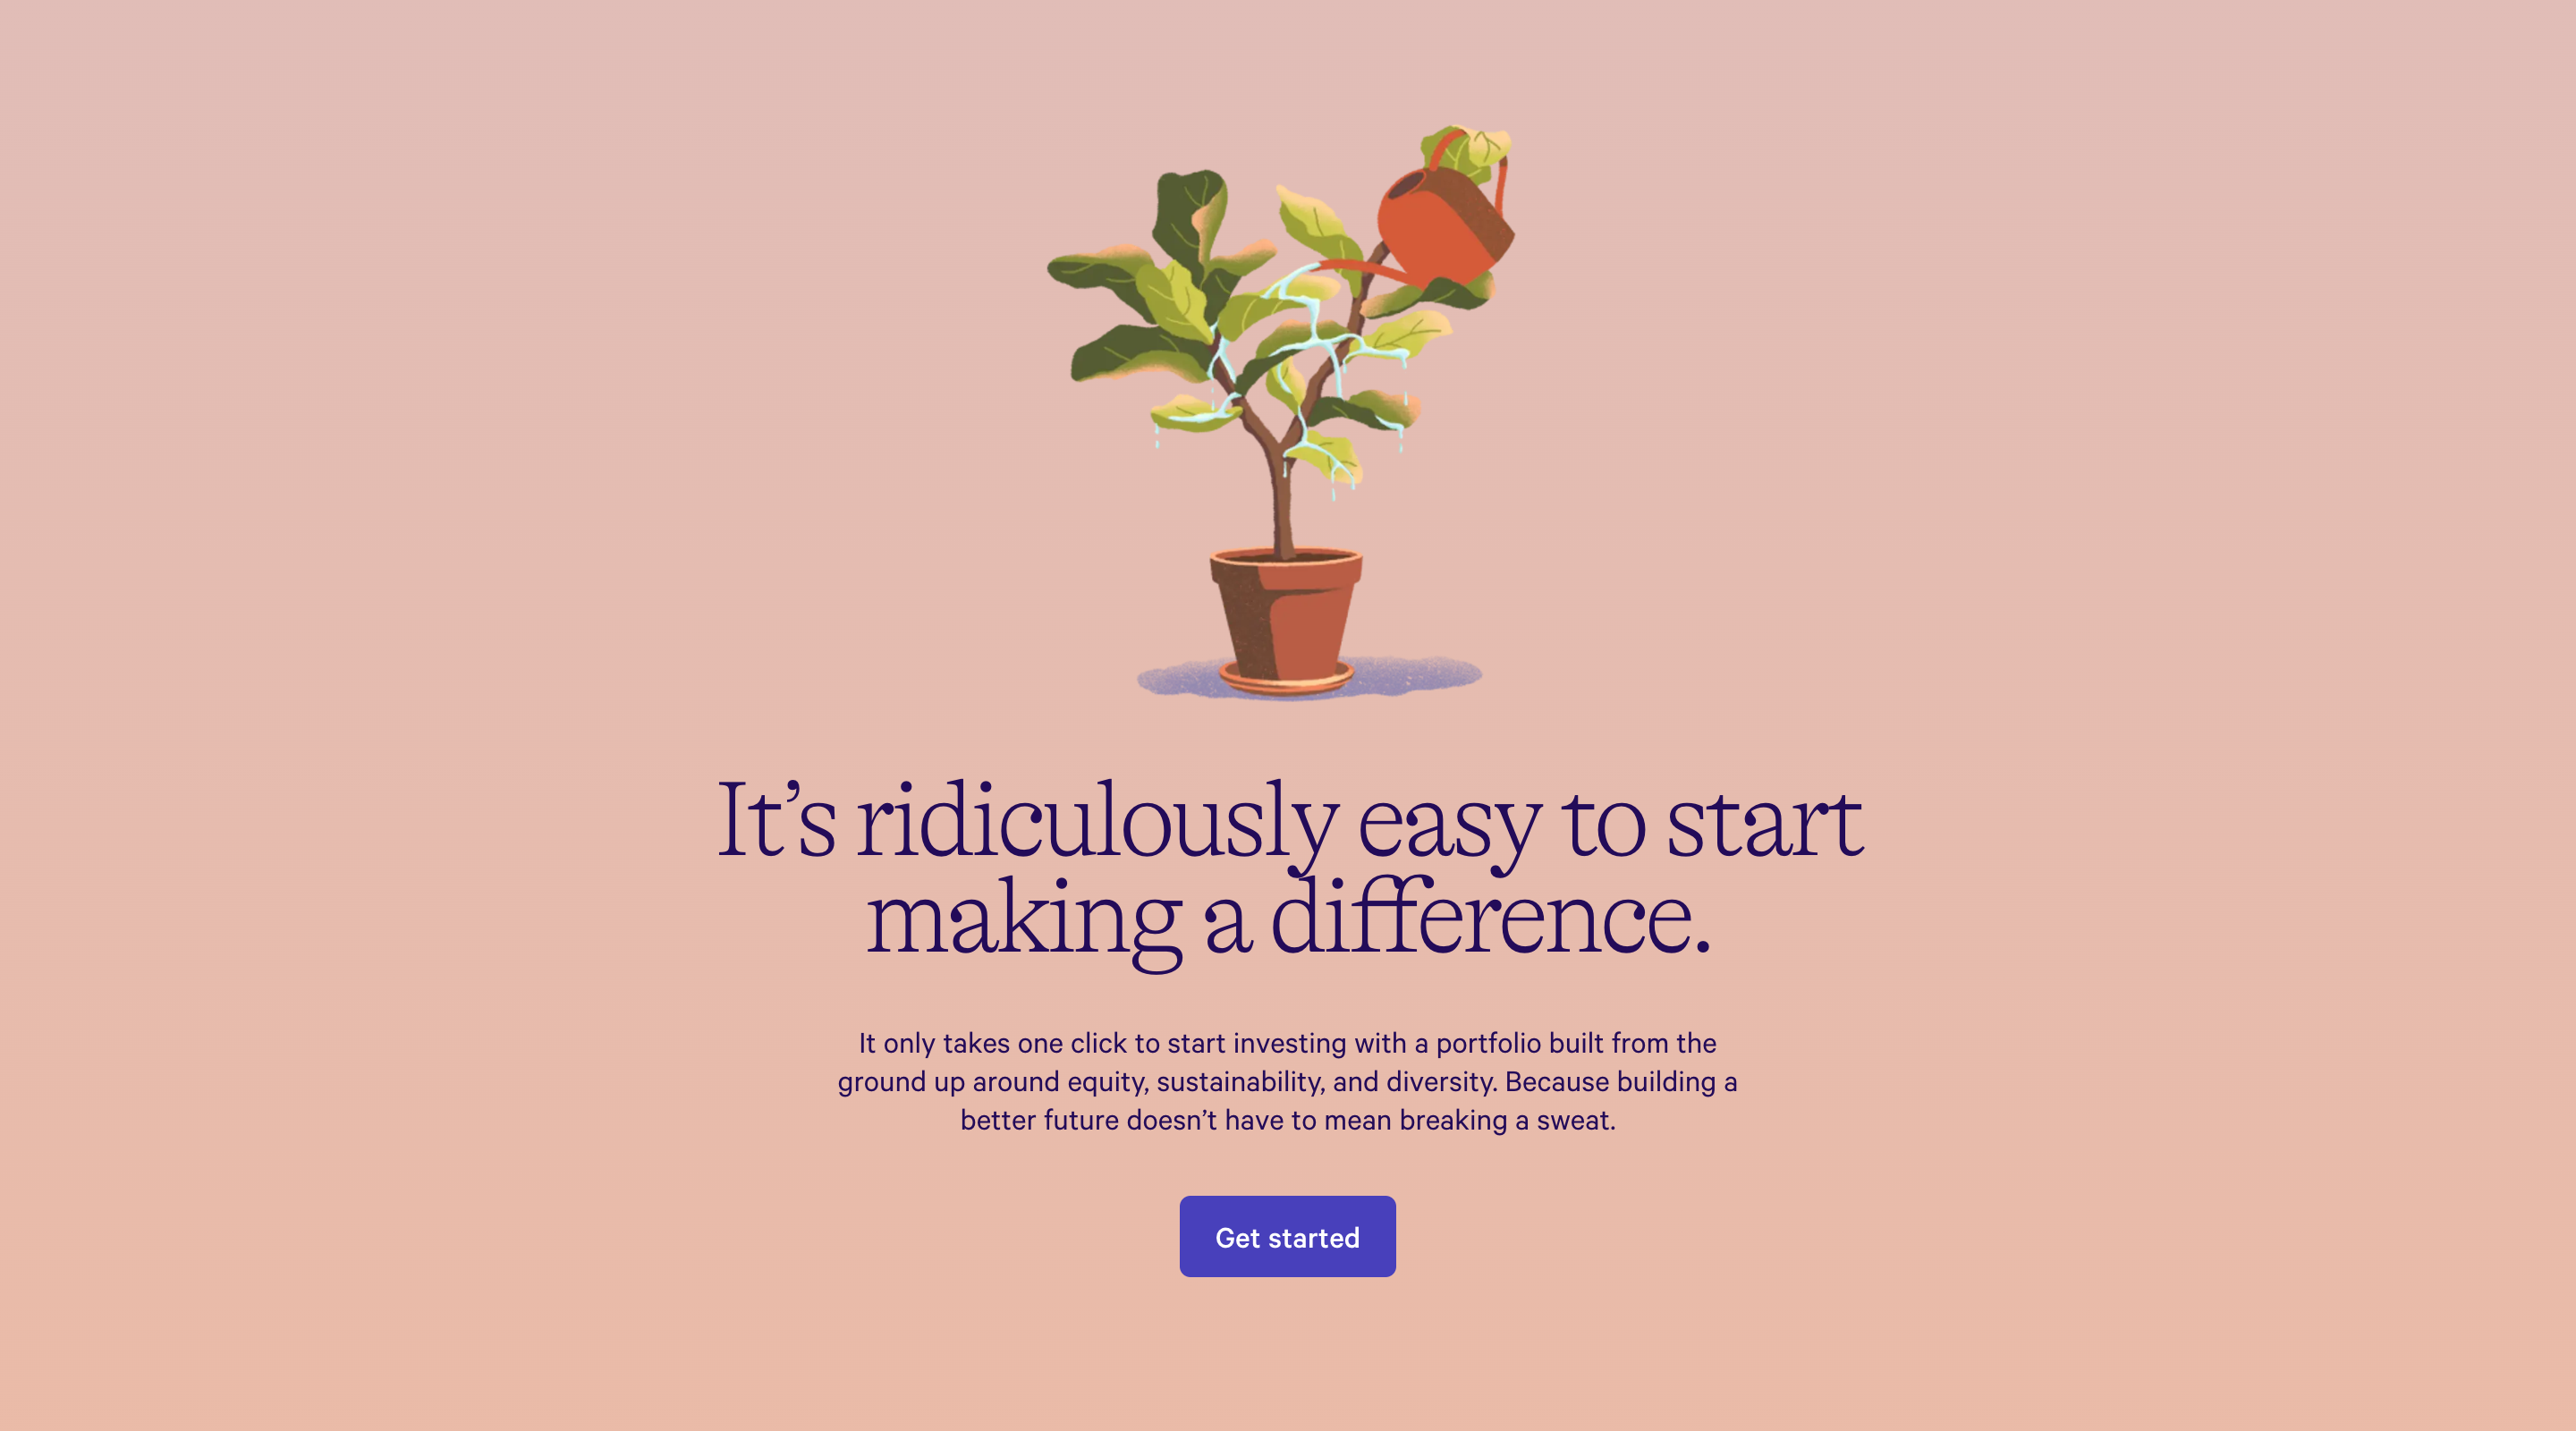 Screenshot of the Wealthfront website. The visible section contains a detailed illustration of a watering can being used to water a plant in a pot. There is a heading and short informtation paragraph followed by a 'Get started' call-to-action button.